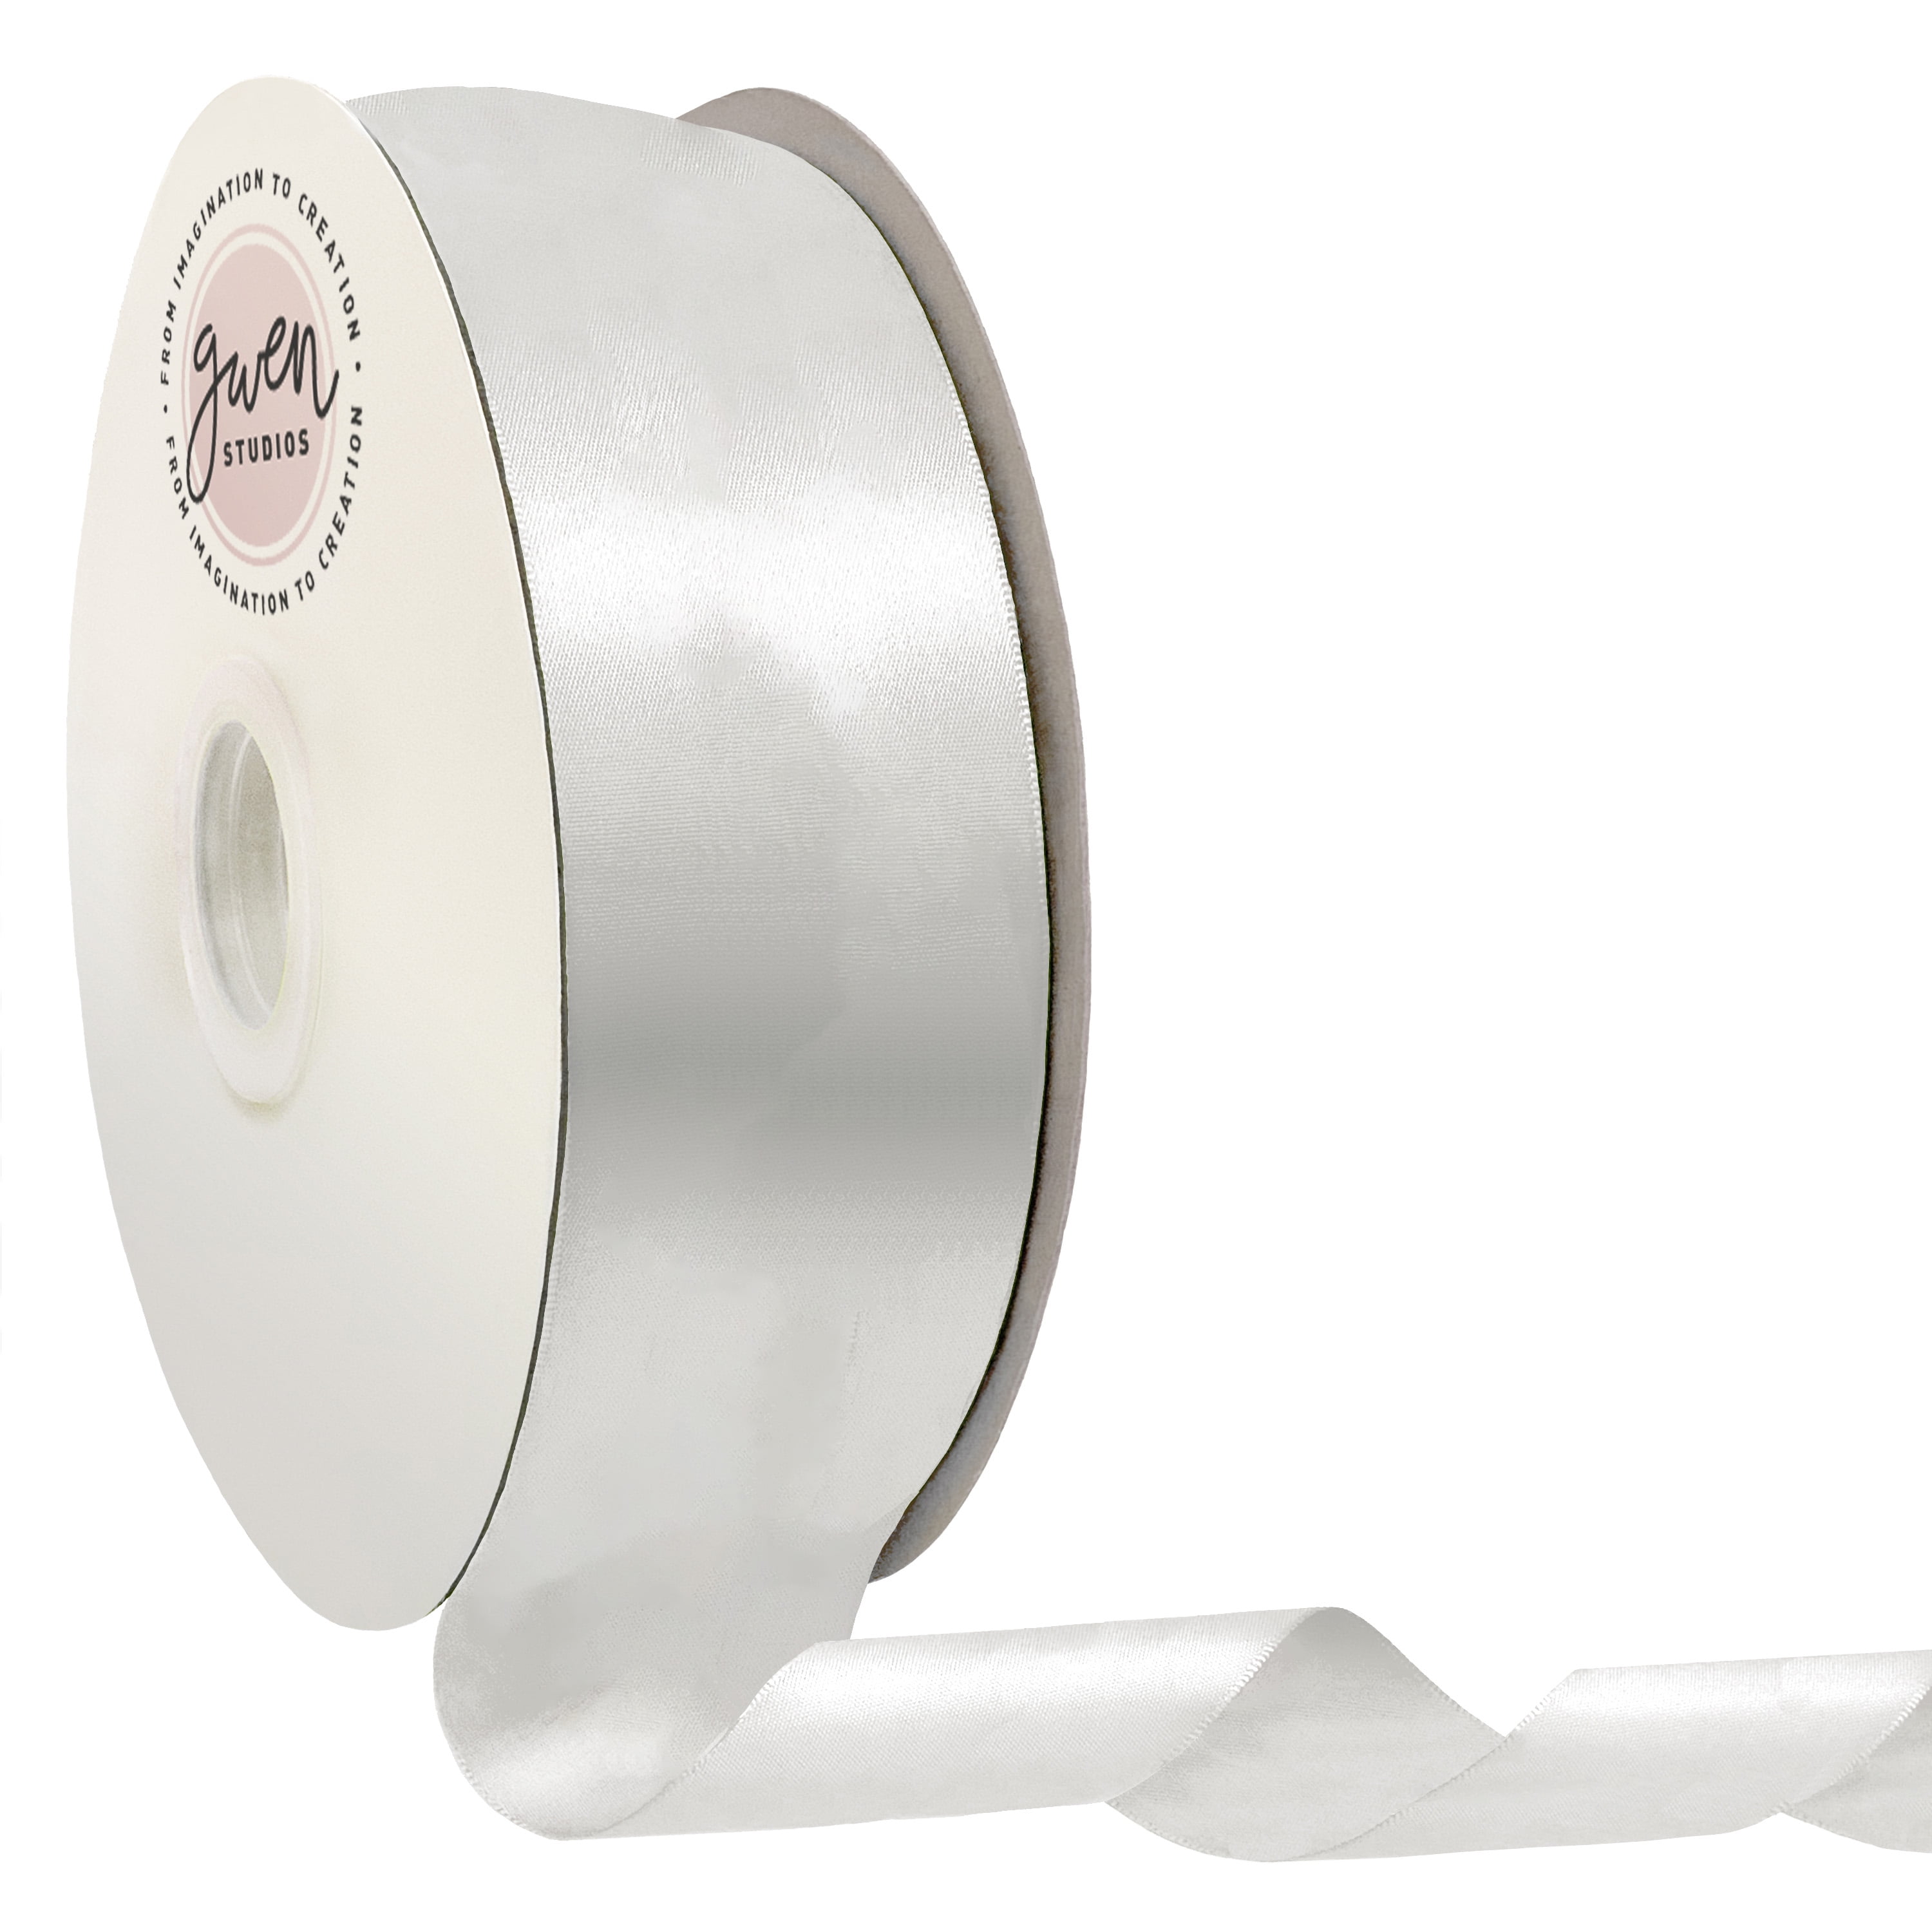 White Double Faced Satin Ribbon for Wedding and Crafts, 2.5 inch x 50 Yards by Gwen Studios